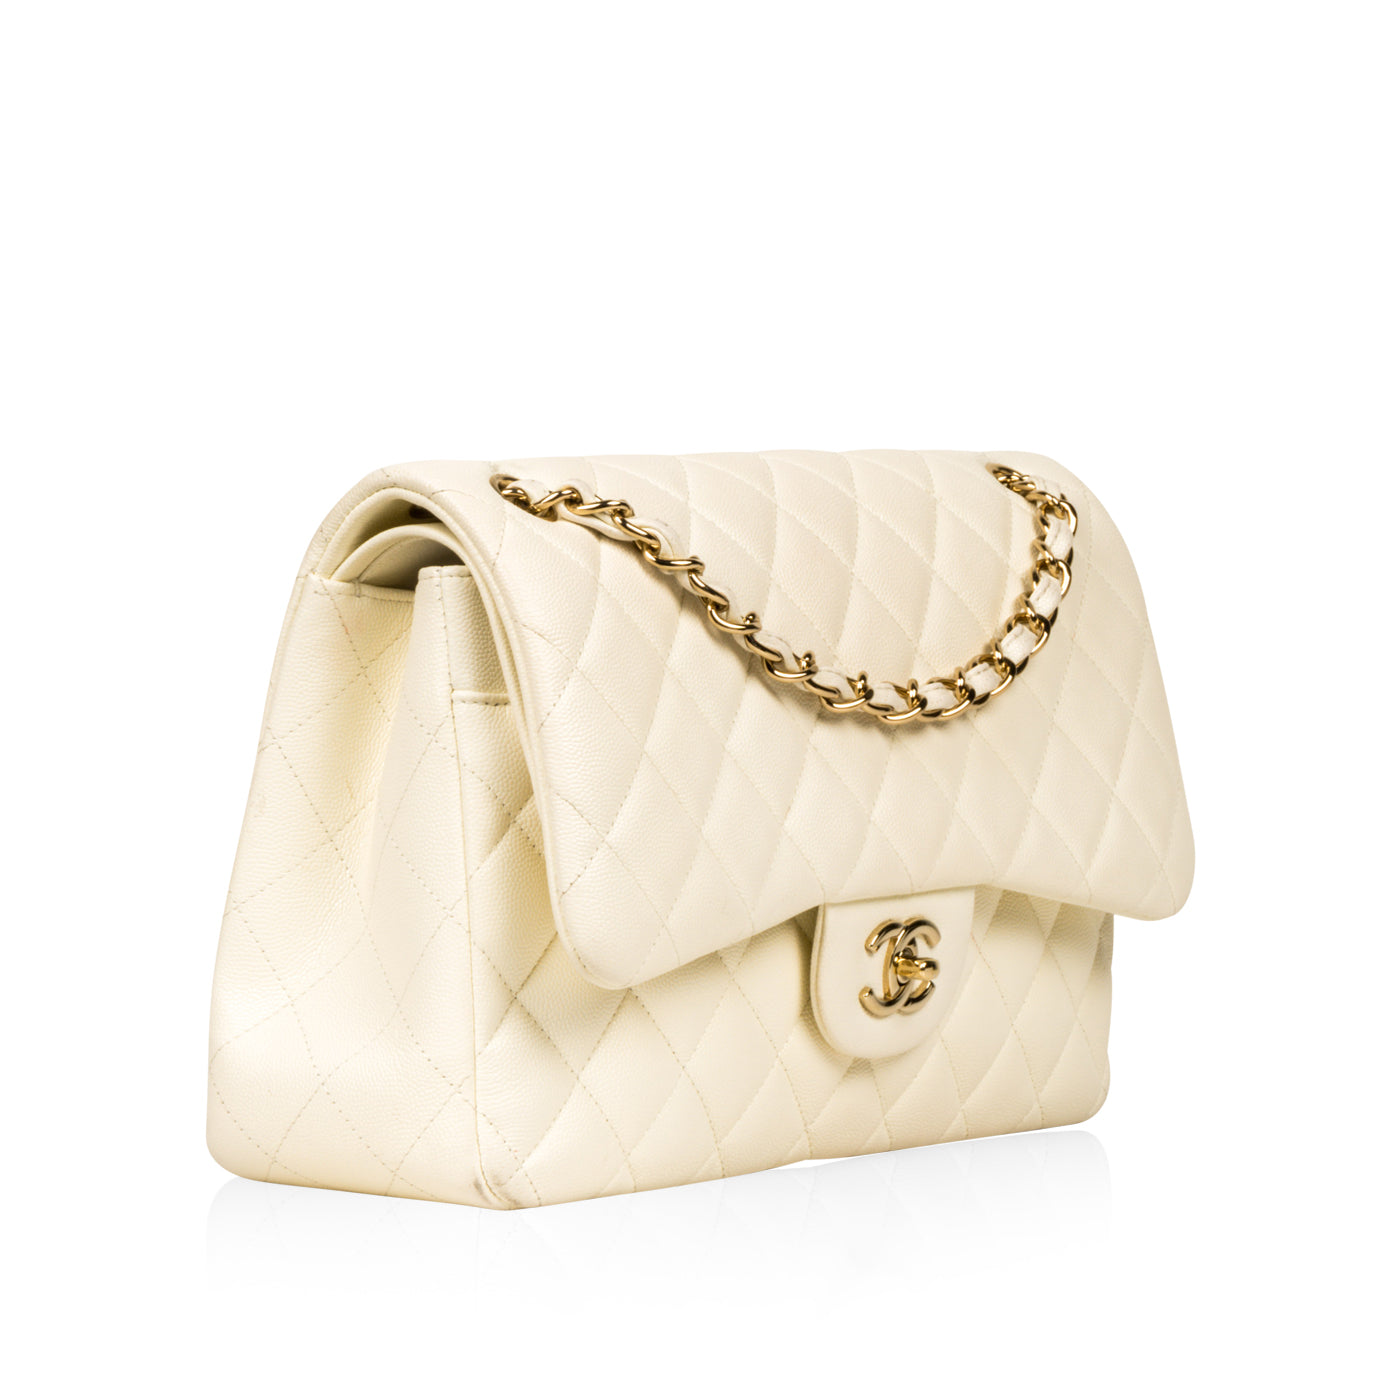 Chanel - Classic Flap Bag Jumbo - Off-white Caviar Leather - Pre-Loved |  Bagista